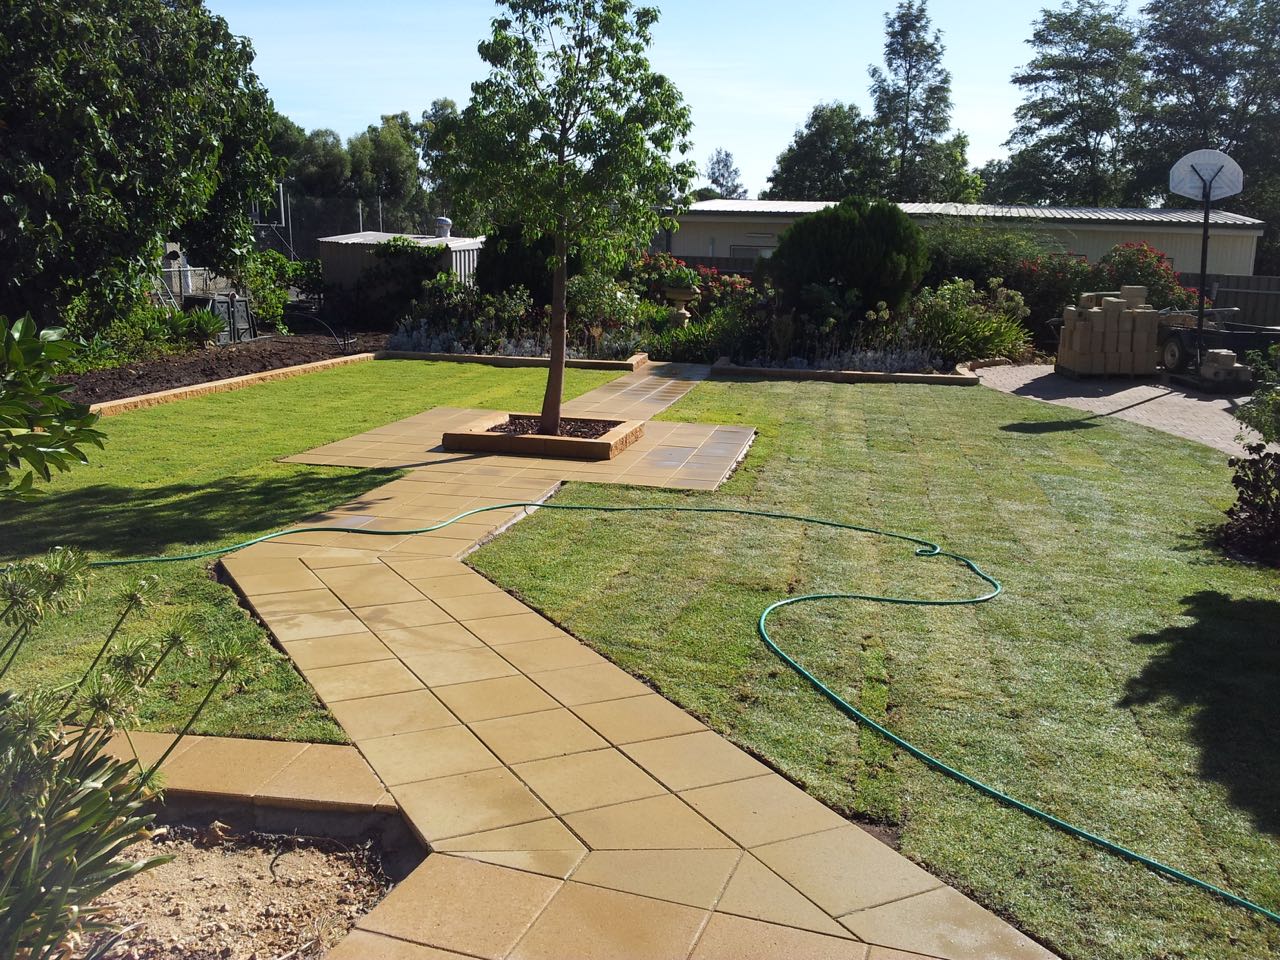 Gawler East - Paved Pathway In Lush Green Lawn